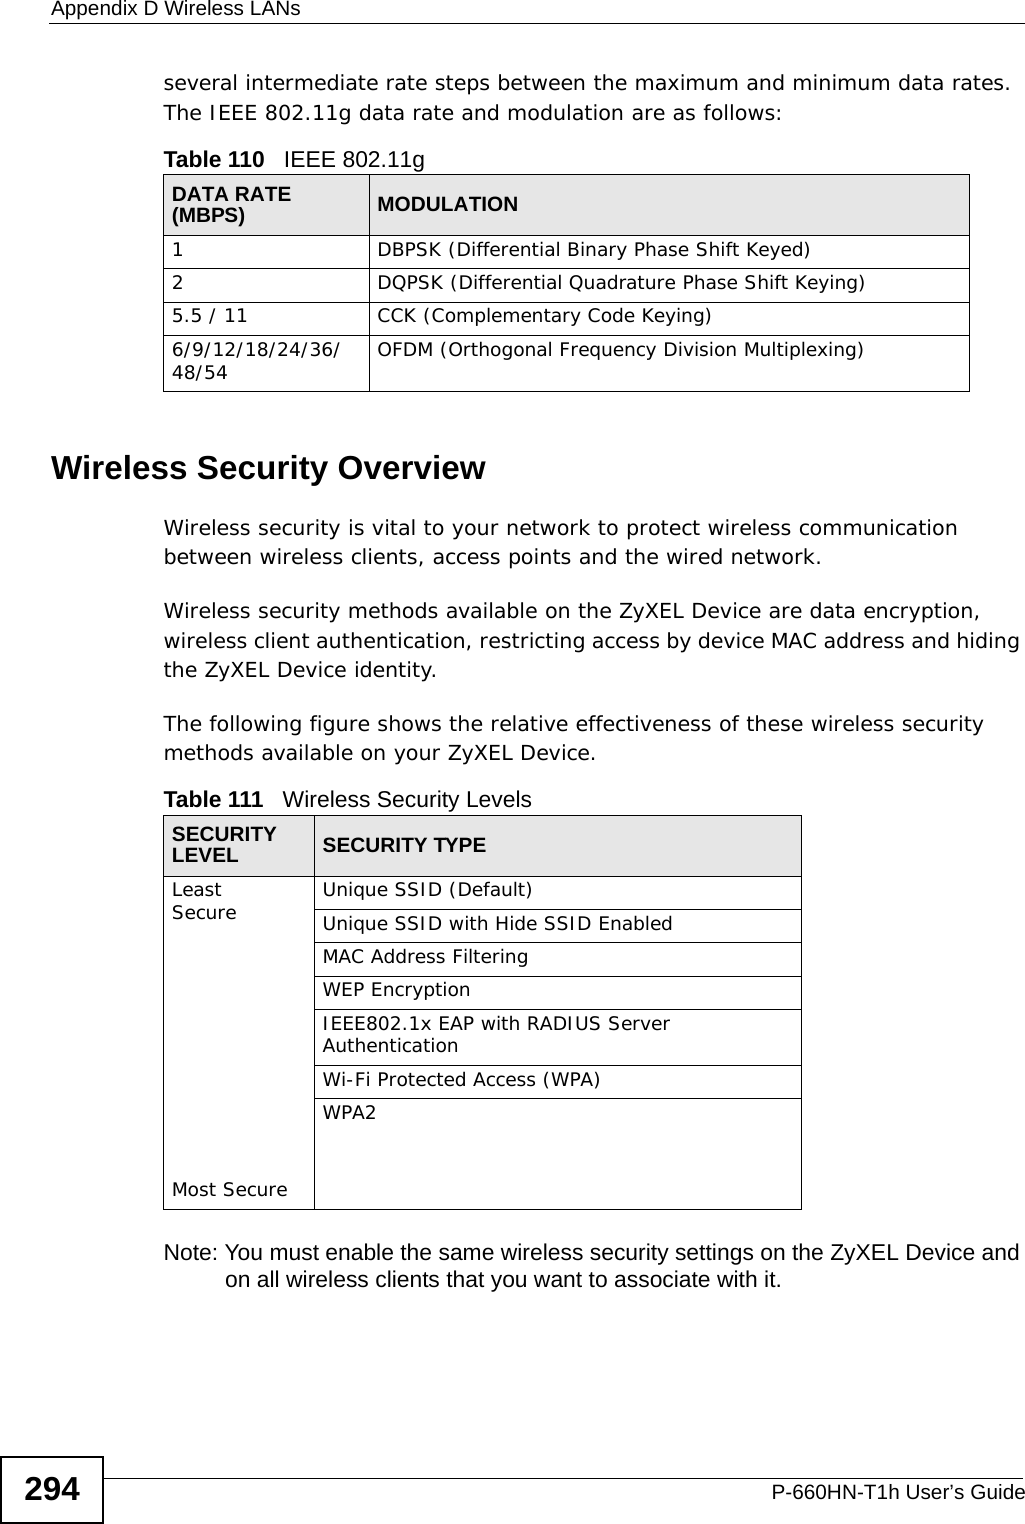 Appendix D Wireless LANsP-660HN-T1h User’s Guide294several intermediate rate steps between the maximum and minimum data rates. The IEEE 802.11g data rate and modulation are as follows:Wireless Security OverviewWireless security is vital to your network to protect wireless communication between wireless clients, access points and the wired network.Wireless security methods available on the ZyXEL Device are data encryption, wireless client authentication, restricting access by device MAC address and hiding the ZyXEL Device identity.The following figure shows the relative effectiveness of these wireless security methods available on your ZyXEL Device.Note: You must enable the same wireless security settings on the ZyXEL Device and on all wireless clients that you want to associate with it. Table 110   IEEE 802.11gDATA RATE (MBPS) MODULATION1 DBPSK (Differential Binary Phase Shift Keyed)2 DQPSK (Differential Quadrature Phase Shift Keying)5.5 / 11 CCK (Complementary Code Keying) 6/9/12/18/24/36/48/54 OFDM (Orthogonal Frequency Division Multiplexing) Table 111   Wireless Security LevelsSECURITY LEVEL SECURITY TYPELeast       Secure                                                                                  Most SecureUnique SSID (Default)Unique SSID with Hide SSID EnabledMAC Address FilteringWEP EncryptionIEEE802.1x EAP with RADIUS Server AuthenticationWi-Fi Protected Access (WPA)WPA2